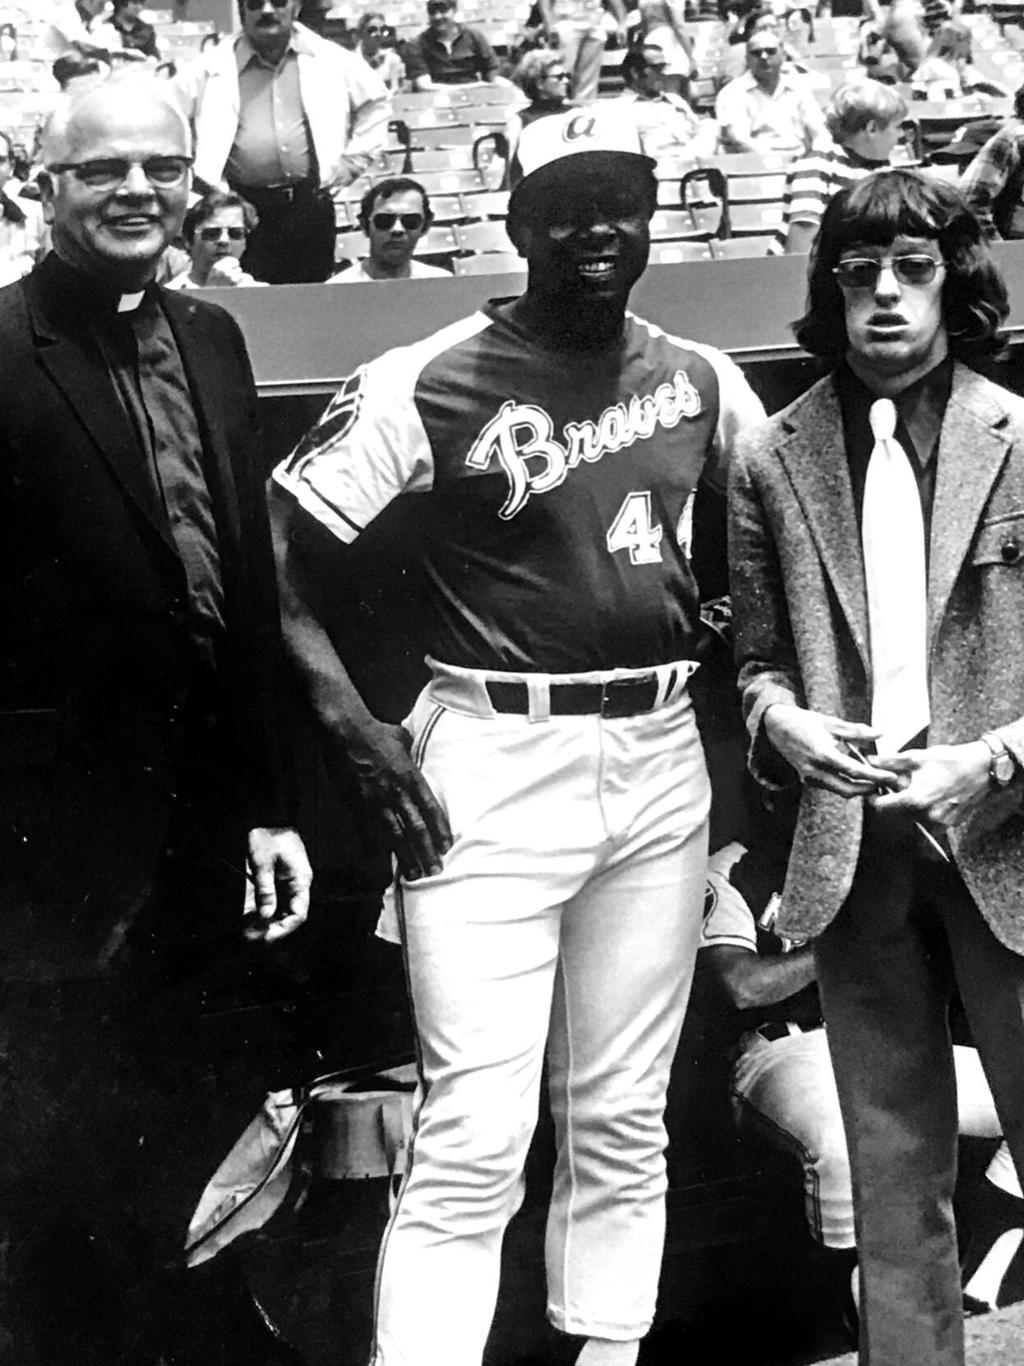 Solomon: Remembering Hank Aaron, his dignity and fight for opportunity